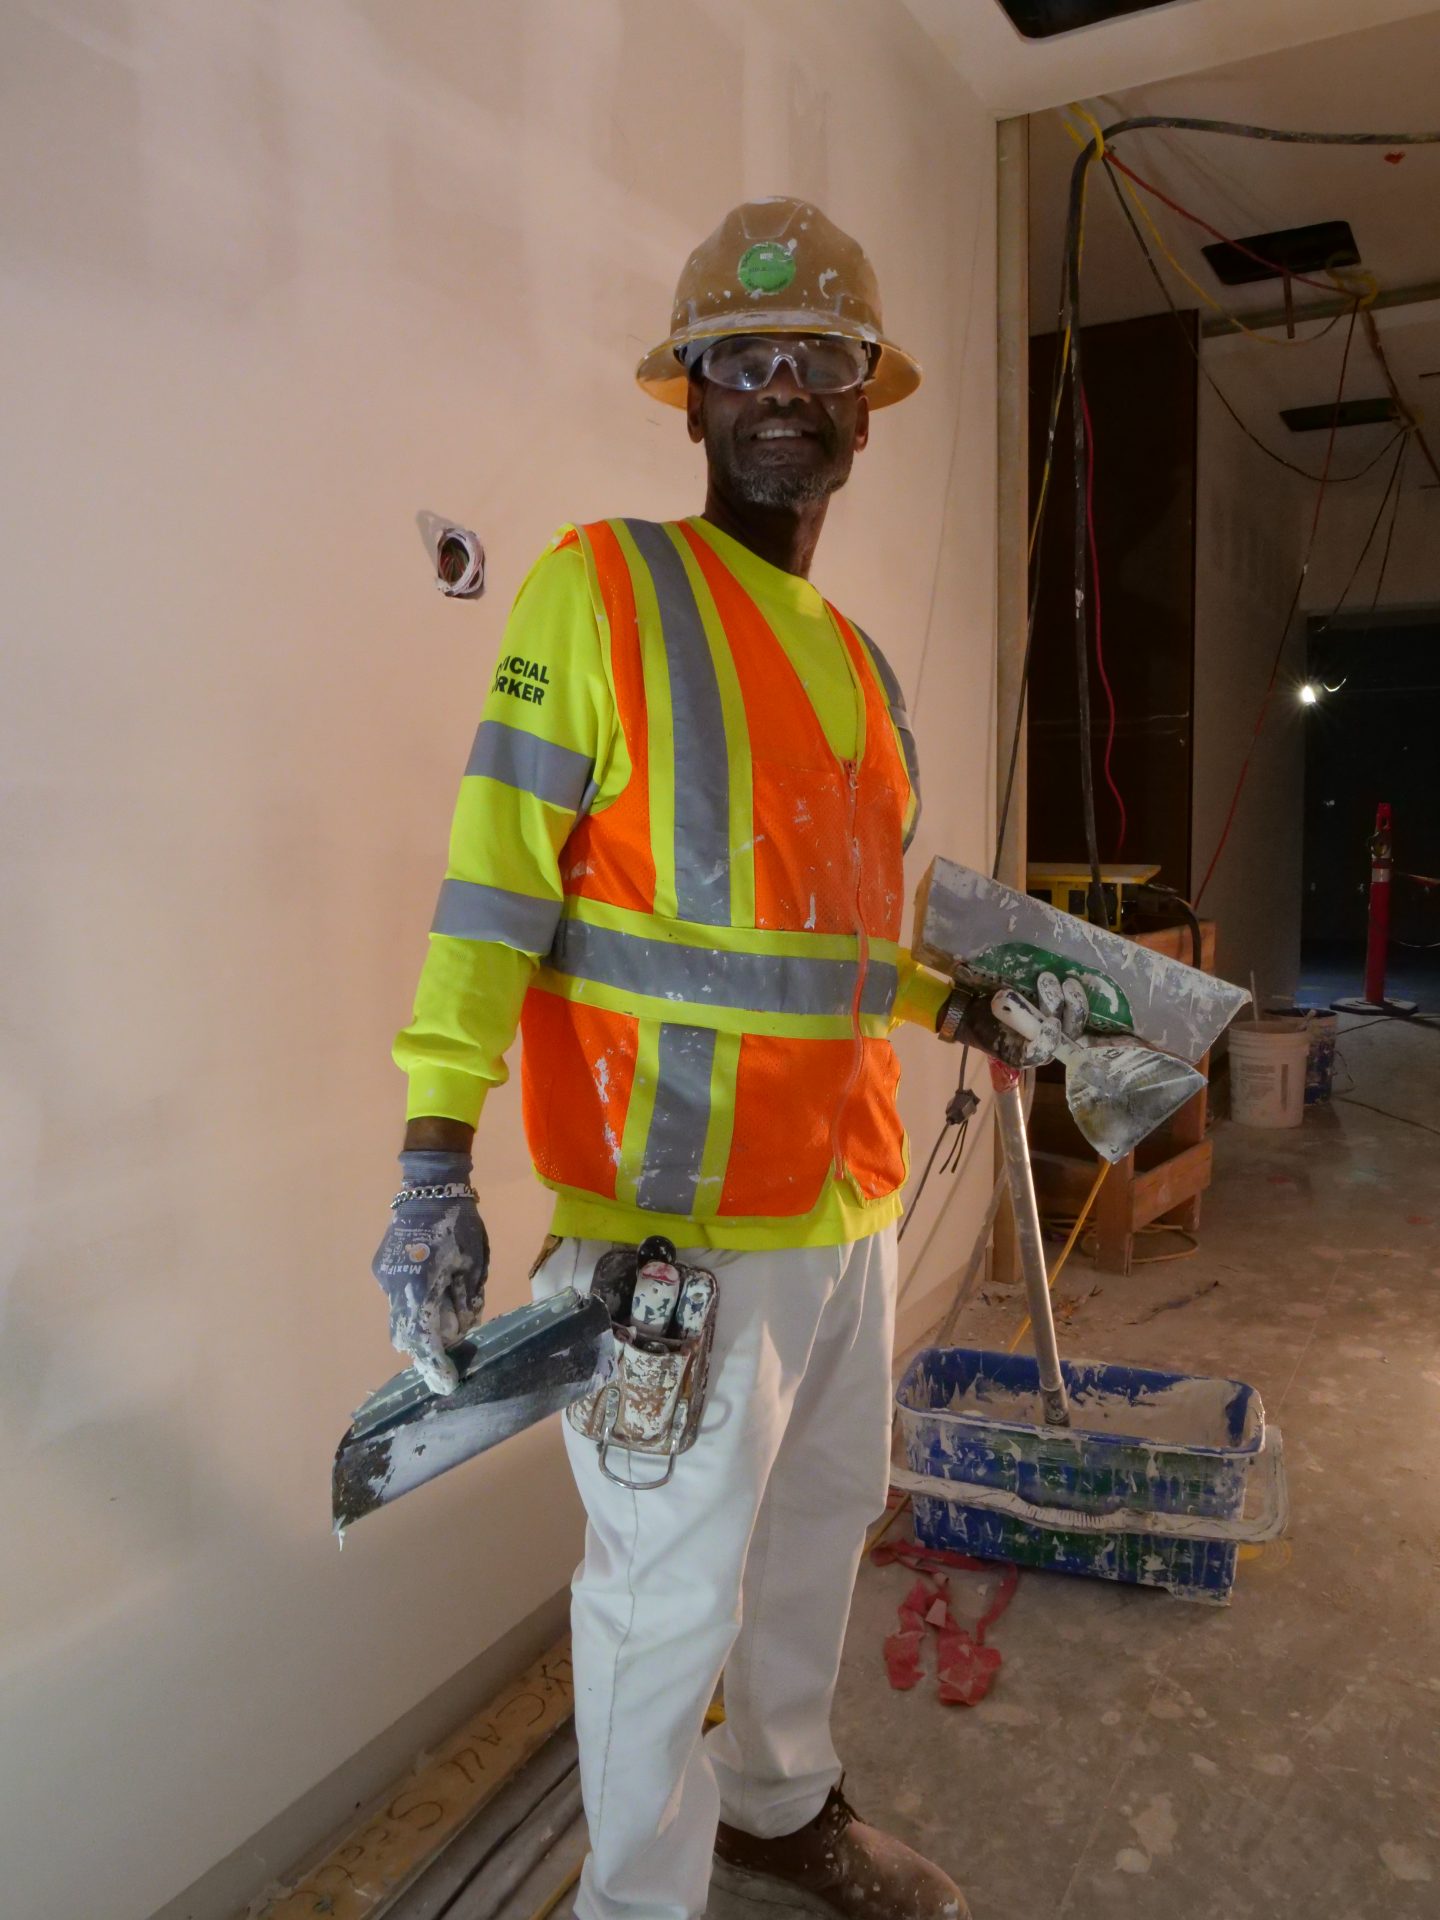 Image from the Gallery: Drywall Finishers 2019